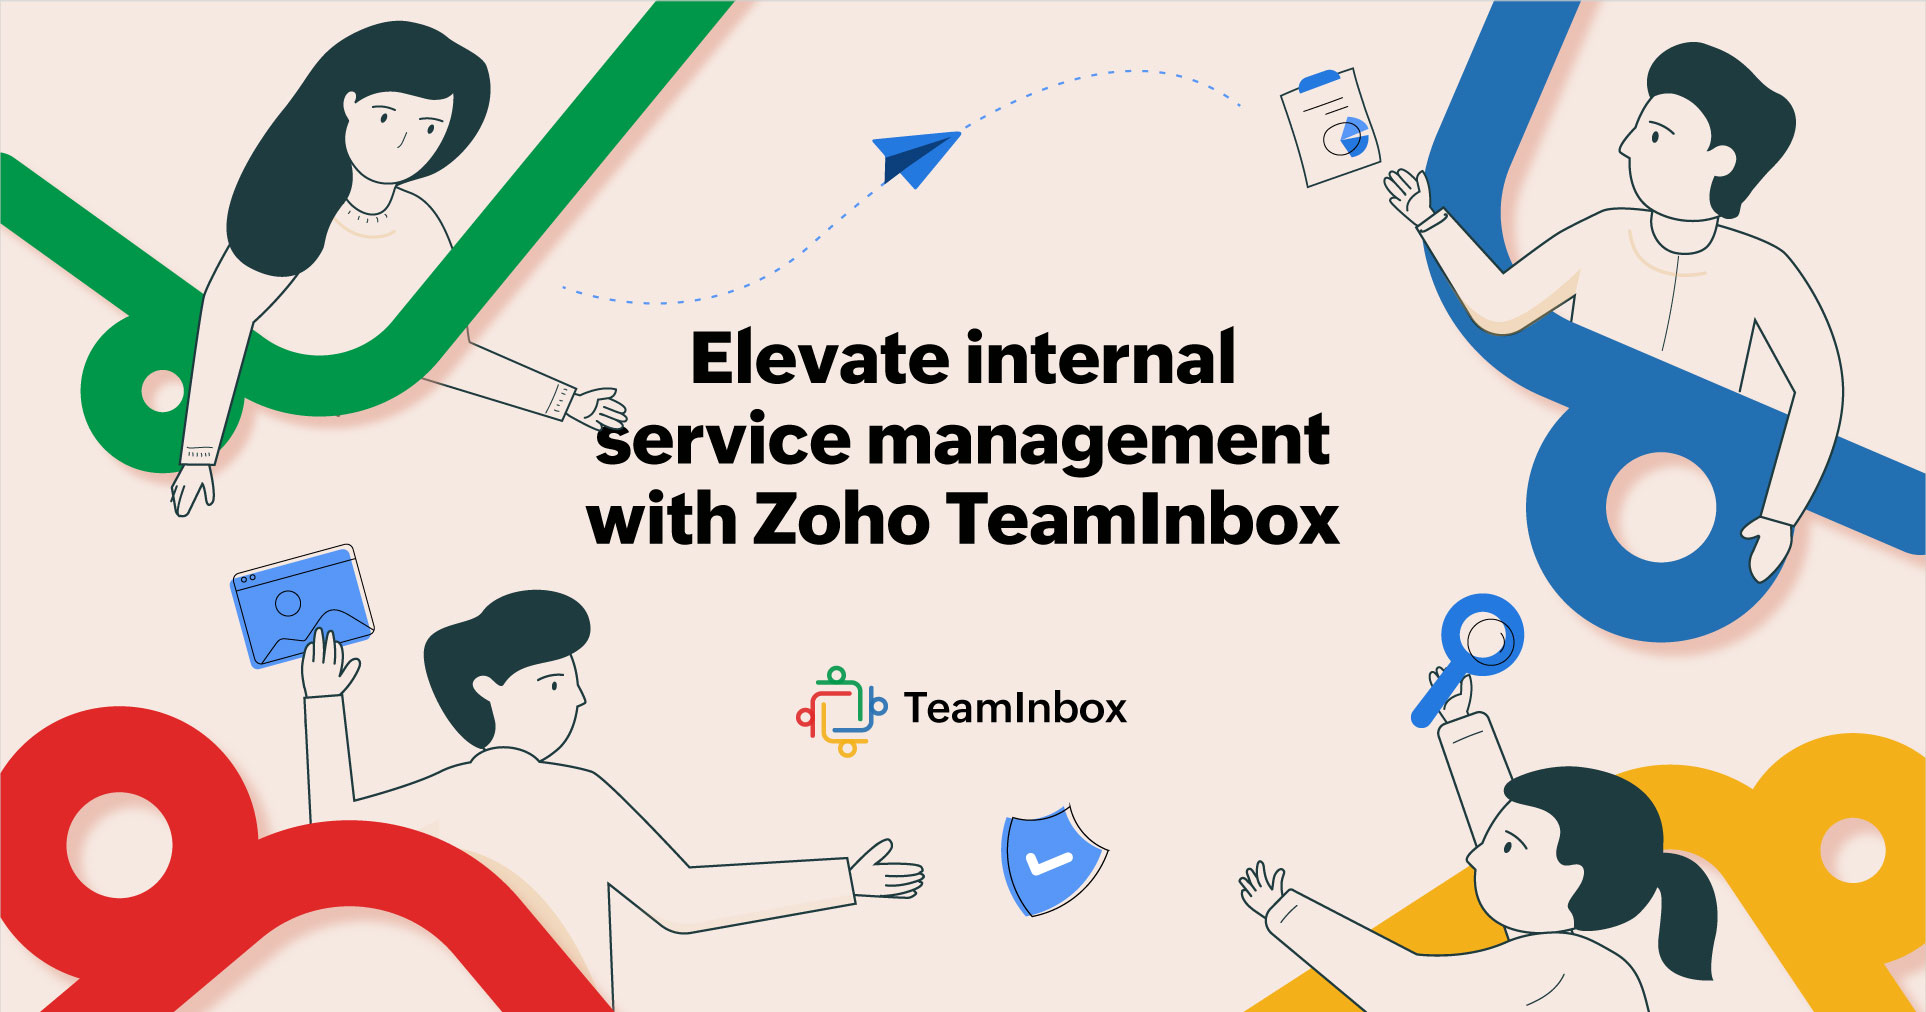 Zoho TeamInbox for internal service management